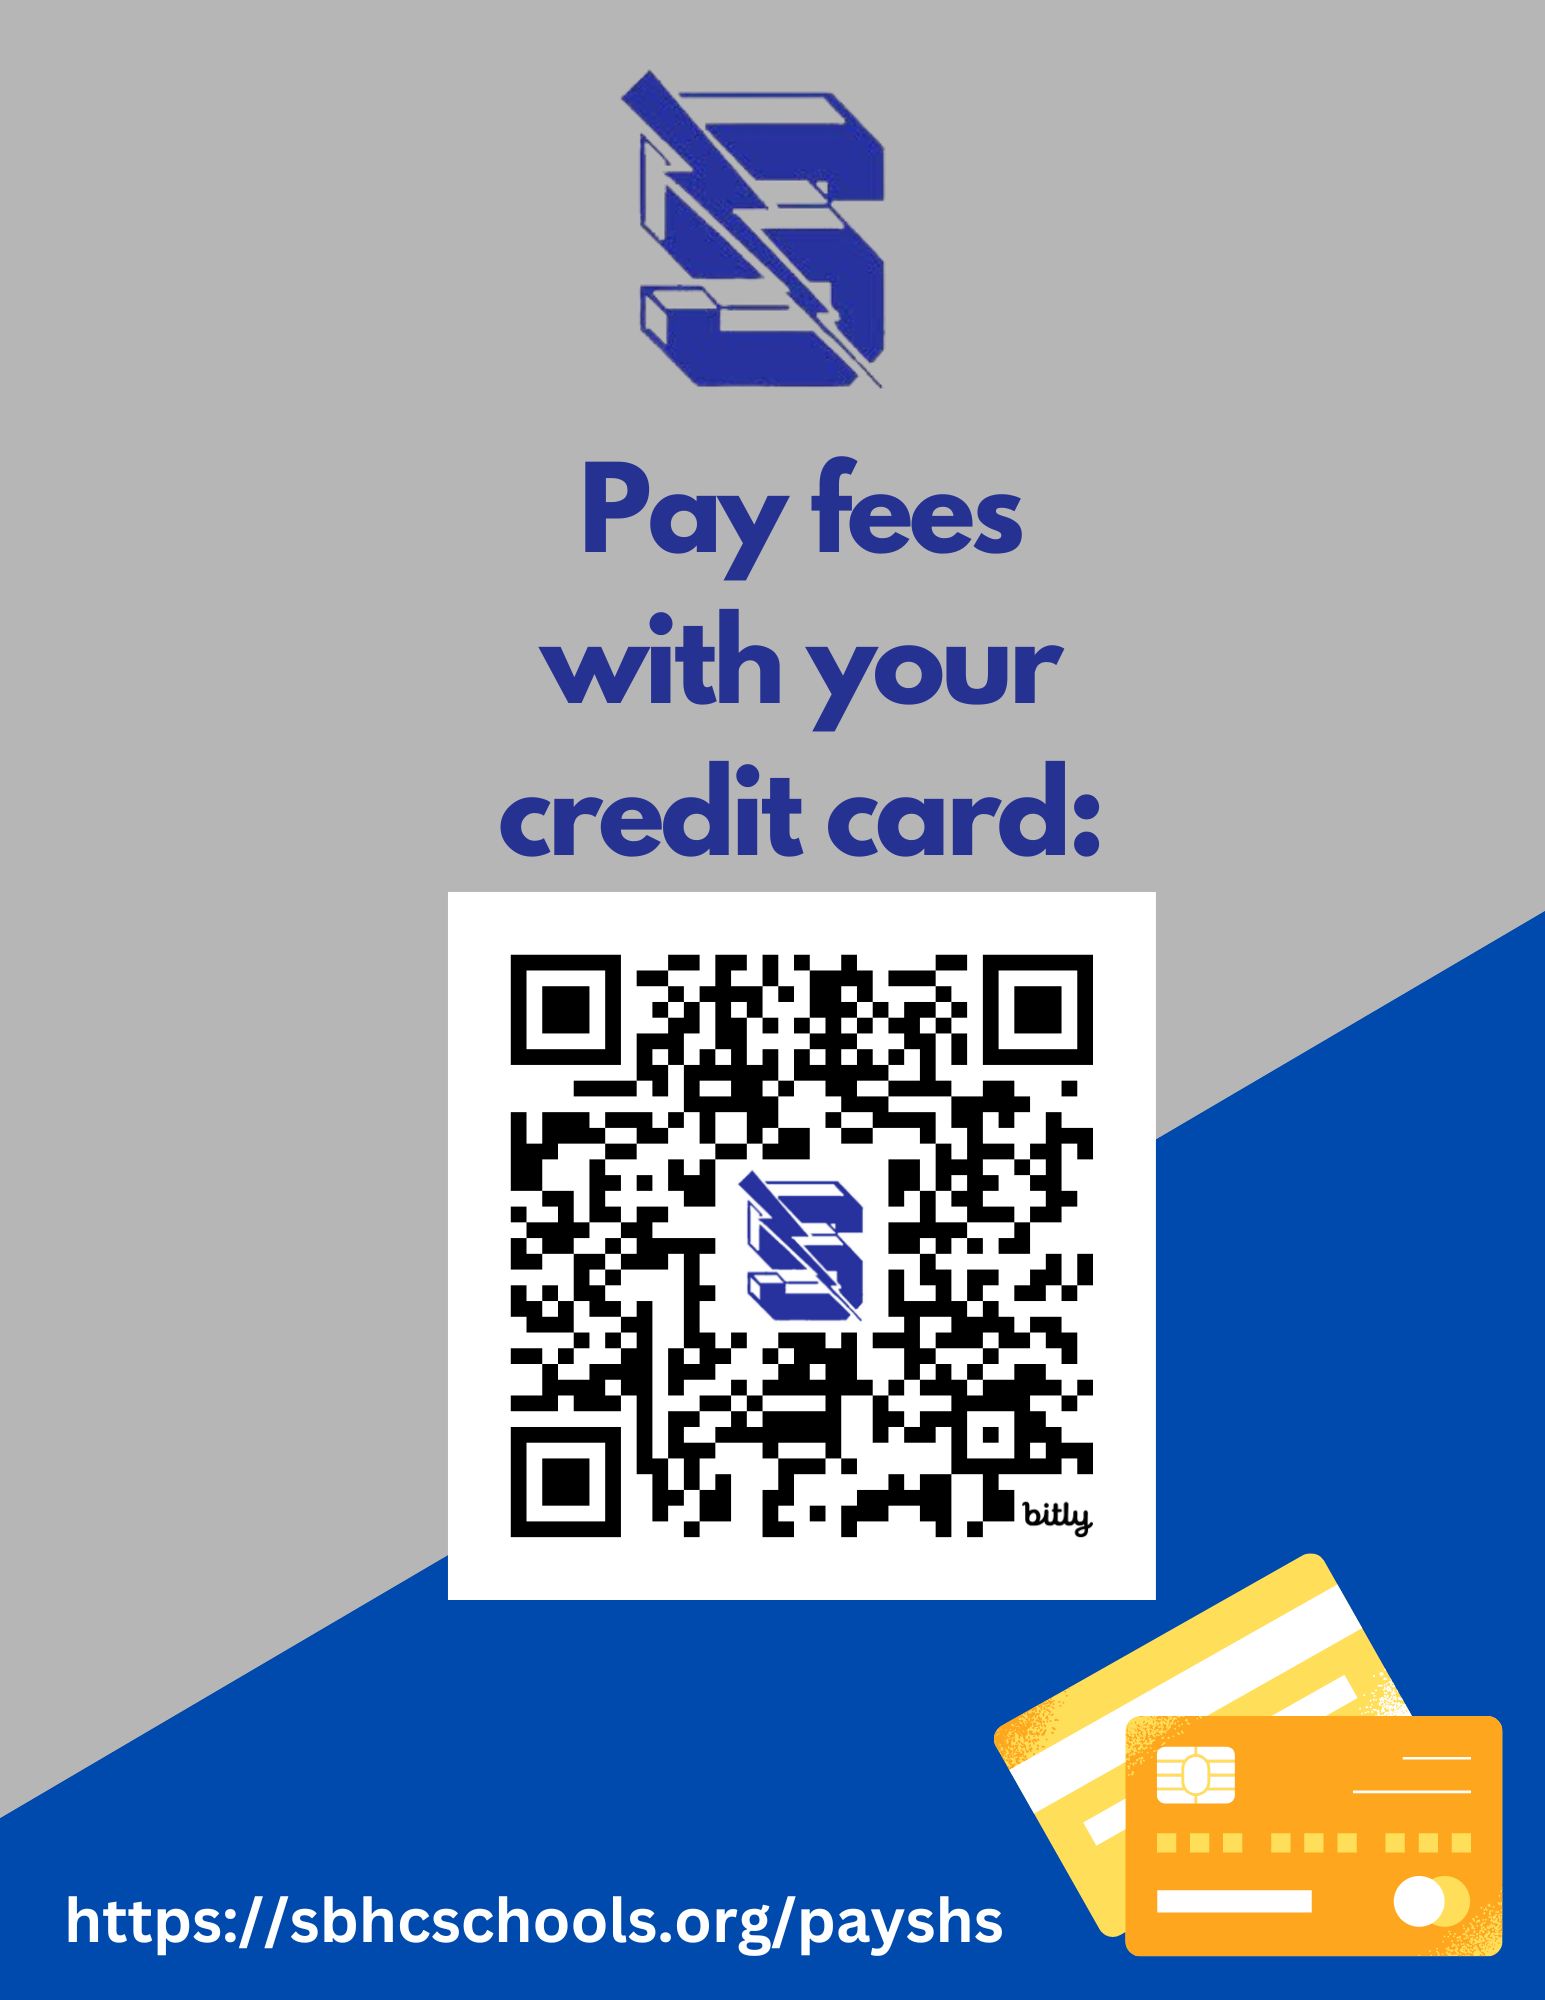 Pay fees with your credit card